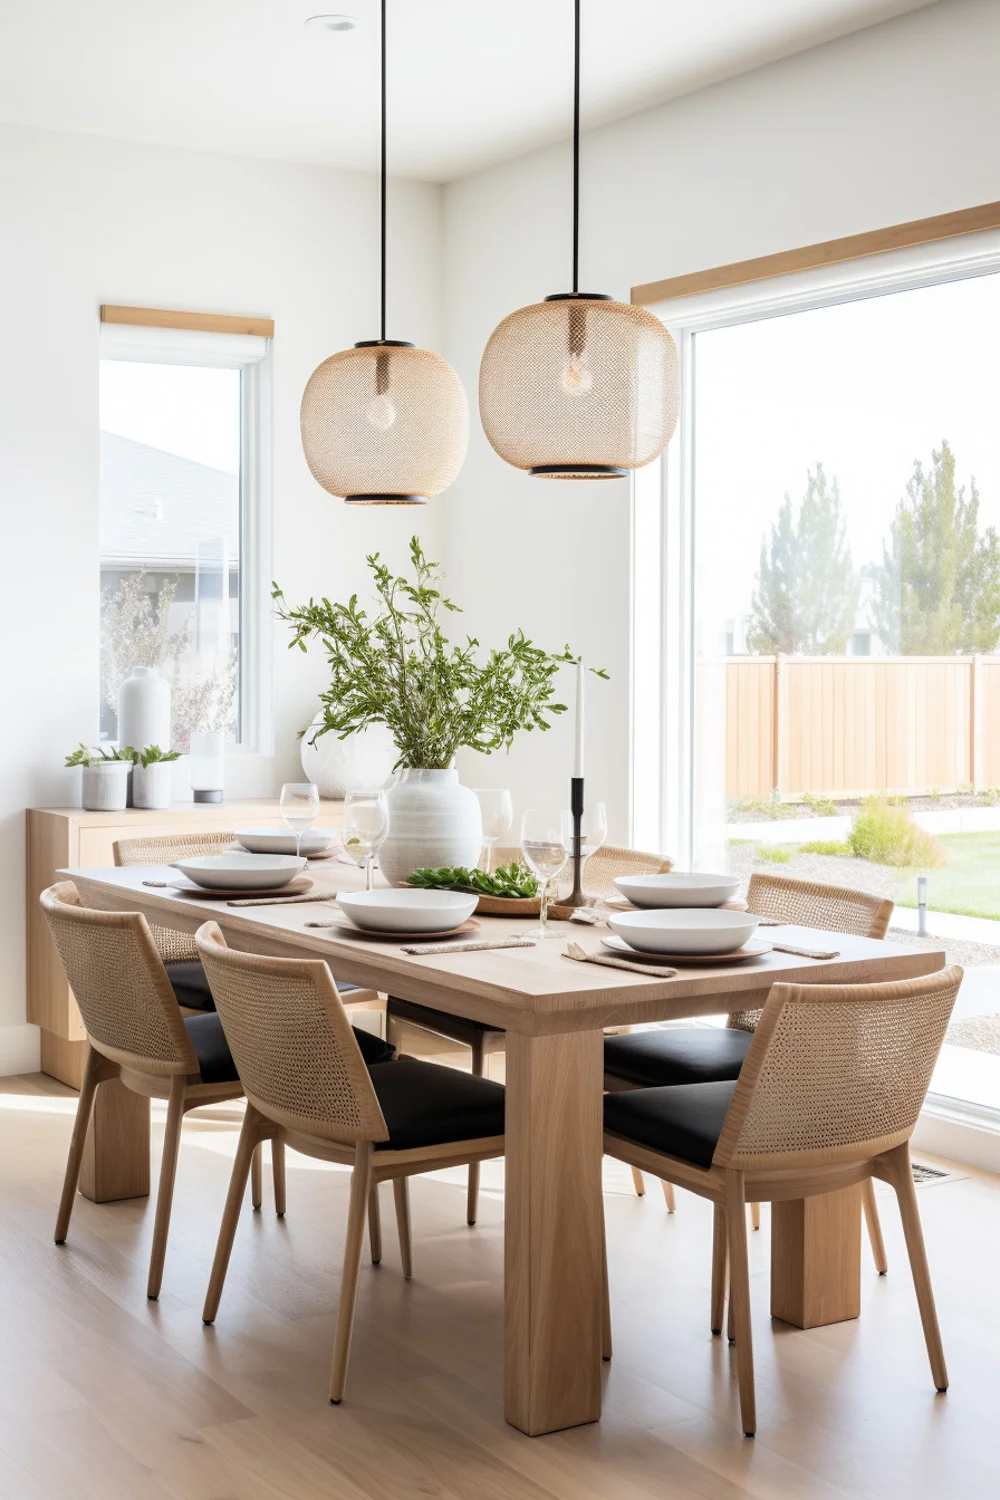 wood dining room with wooden table, cane chairs, and two pendants, transitional modern style with vase centerpiece